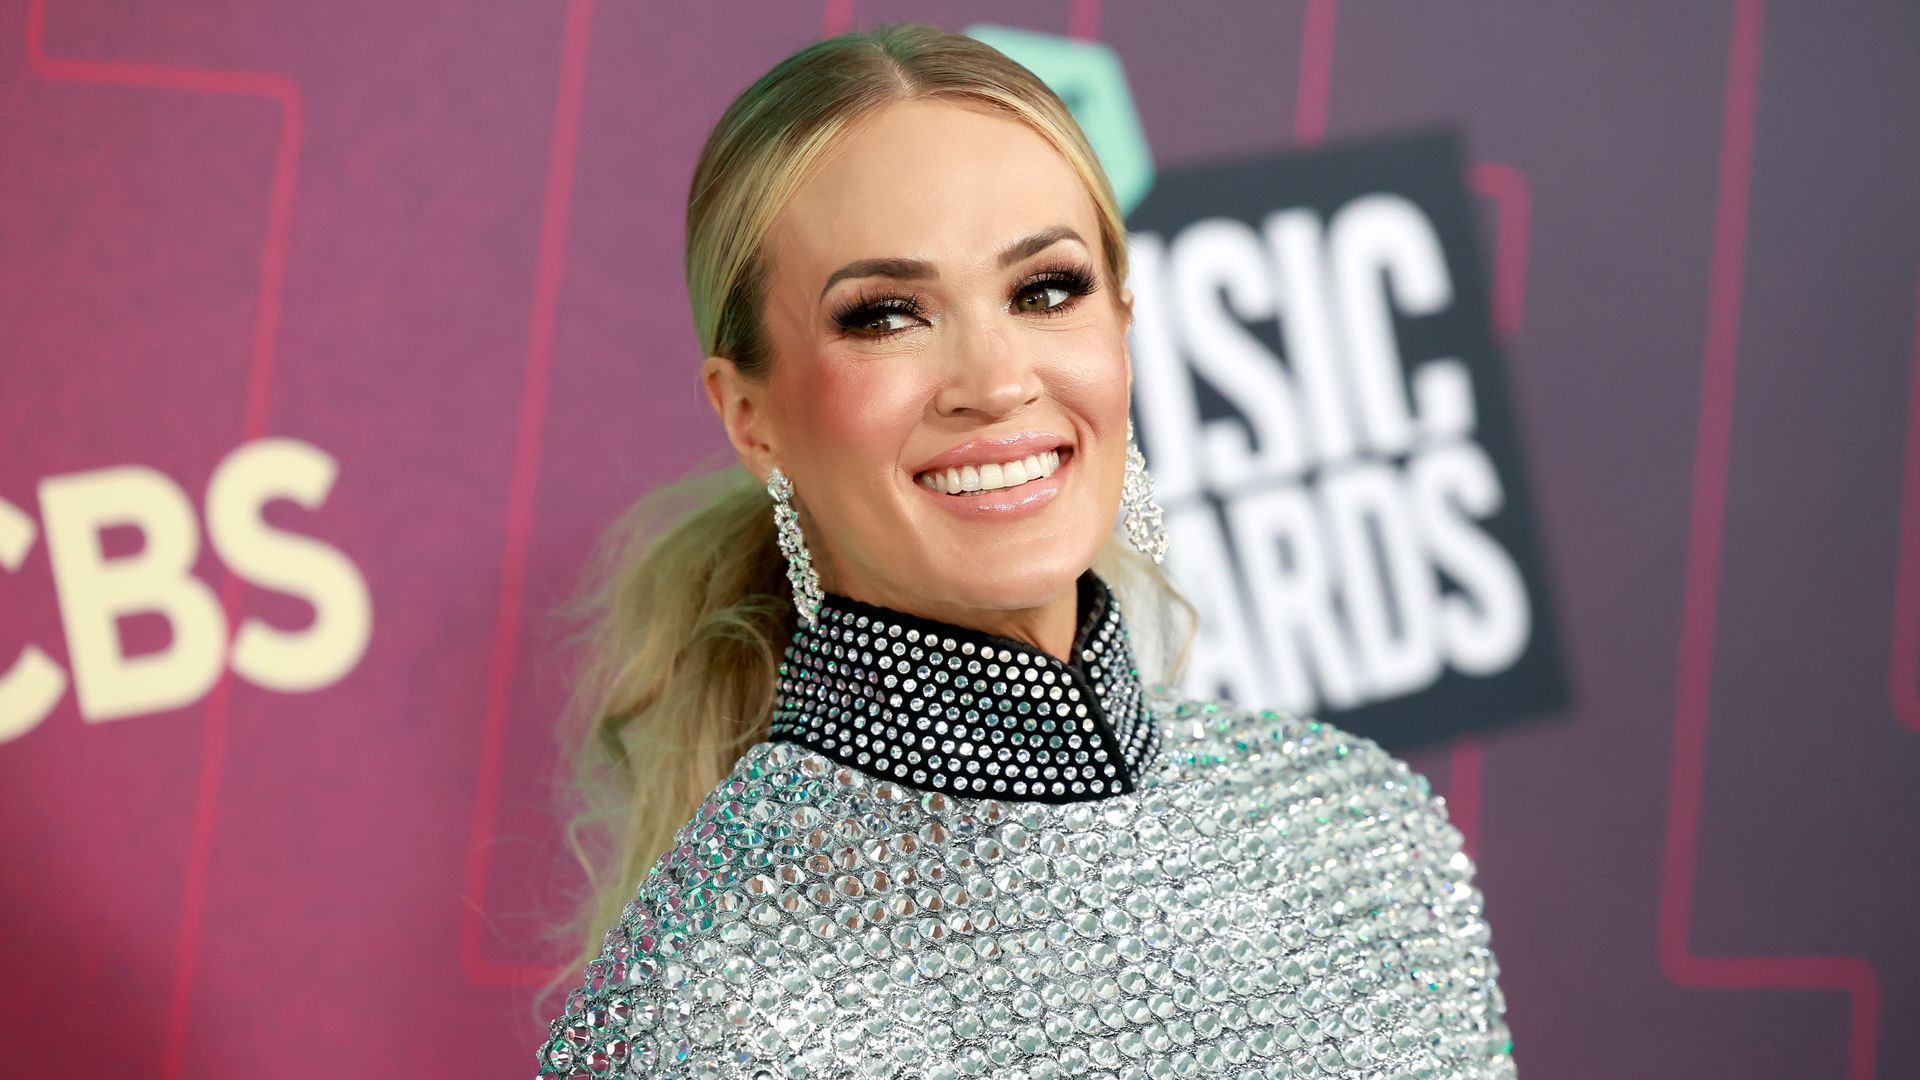  Carrie Underwood attends the 2023 CMT Music Awards in a silver dress